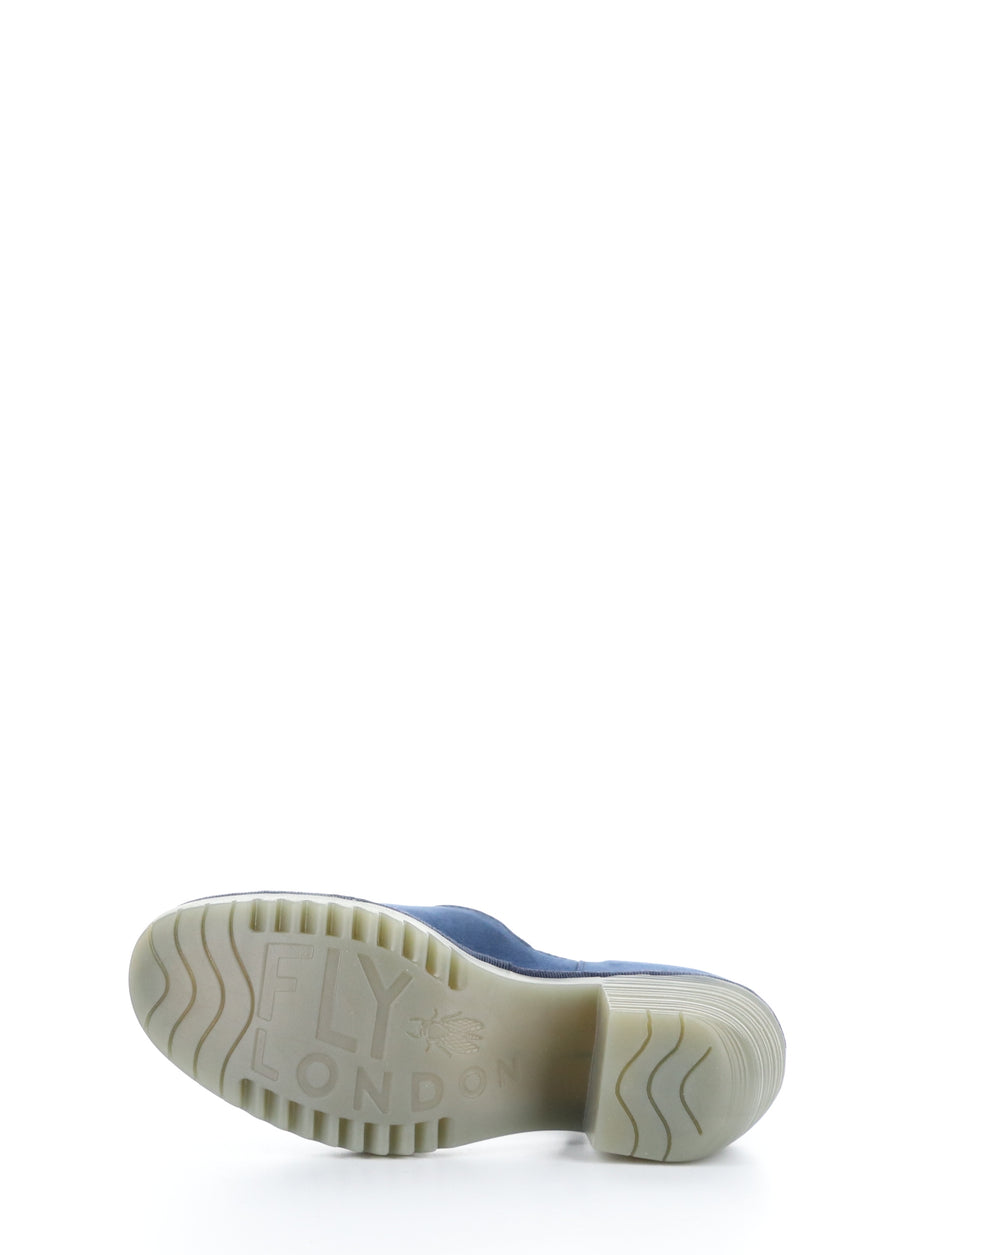 WIFO440FLY 001 BLUE Velcro Shoes